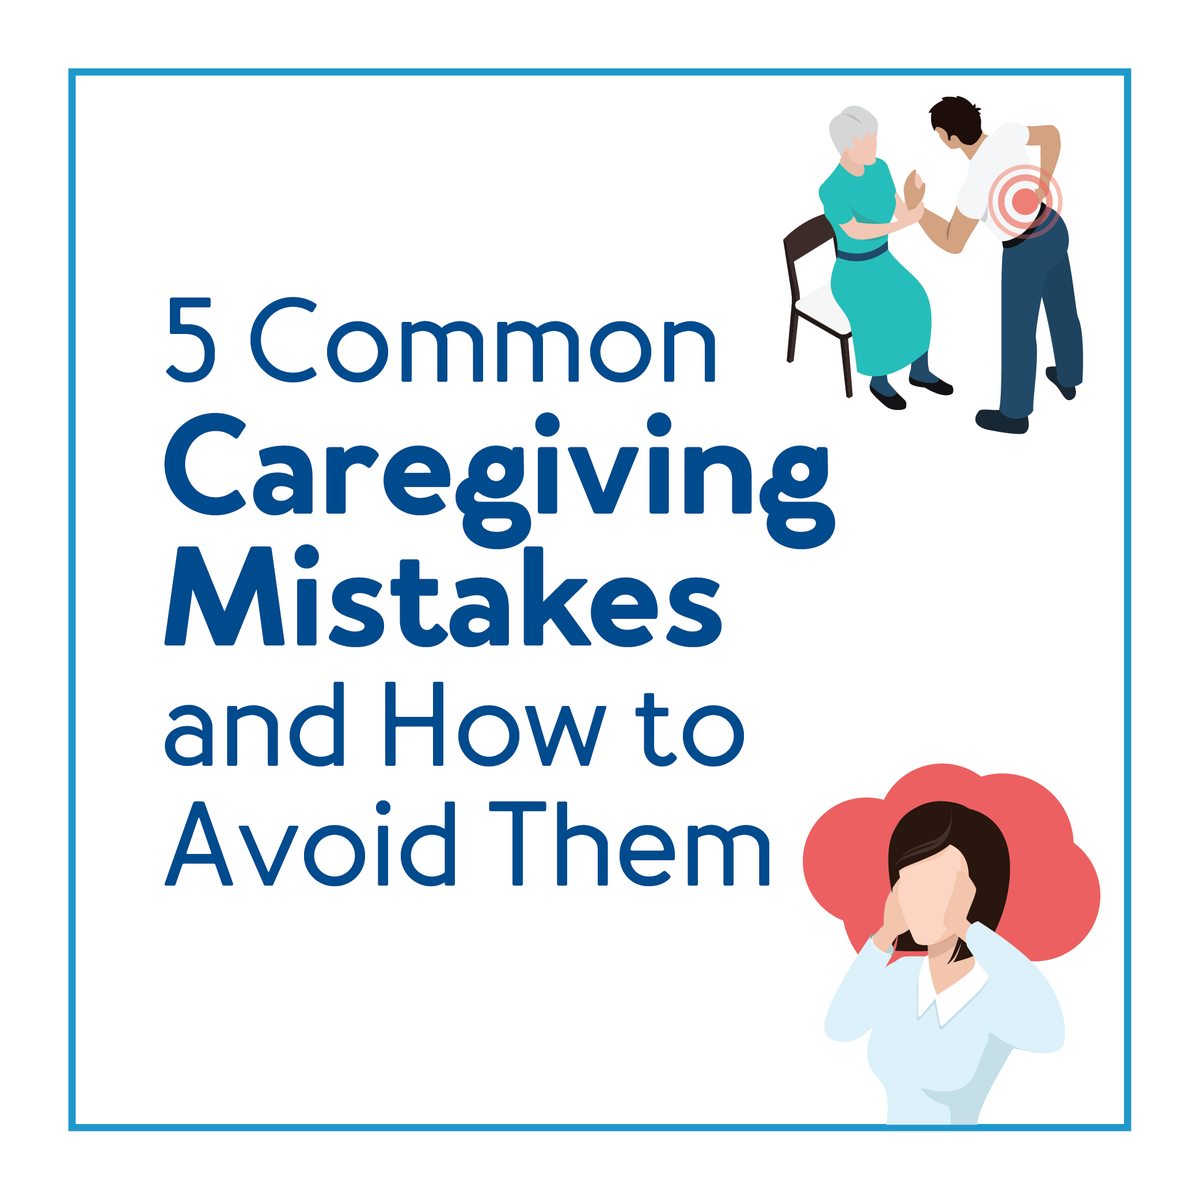 A graphic of people with text, “5 Common Caregiving Mistakes and How to Avoid Them”